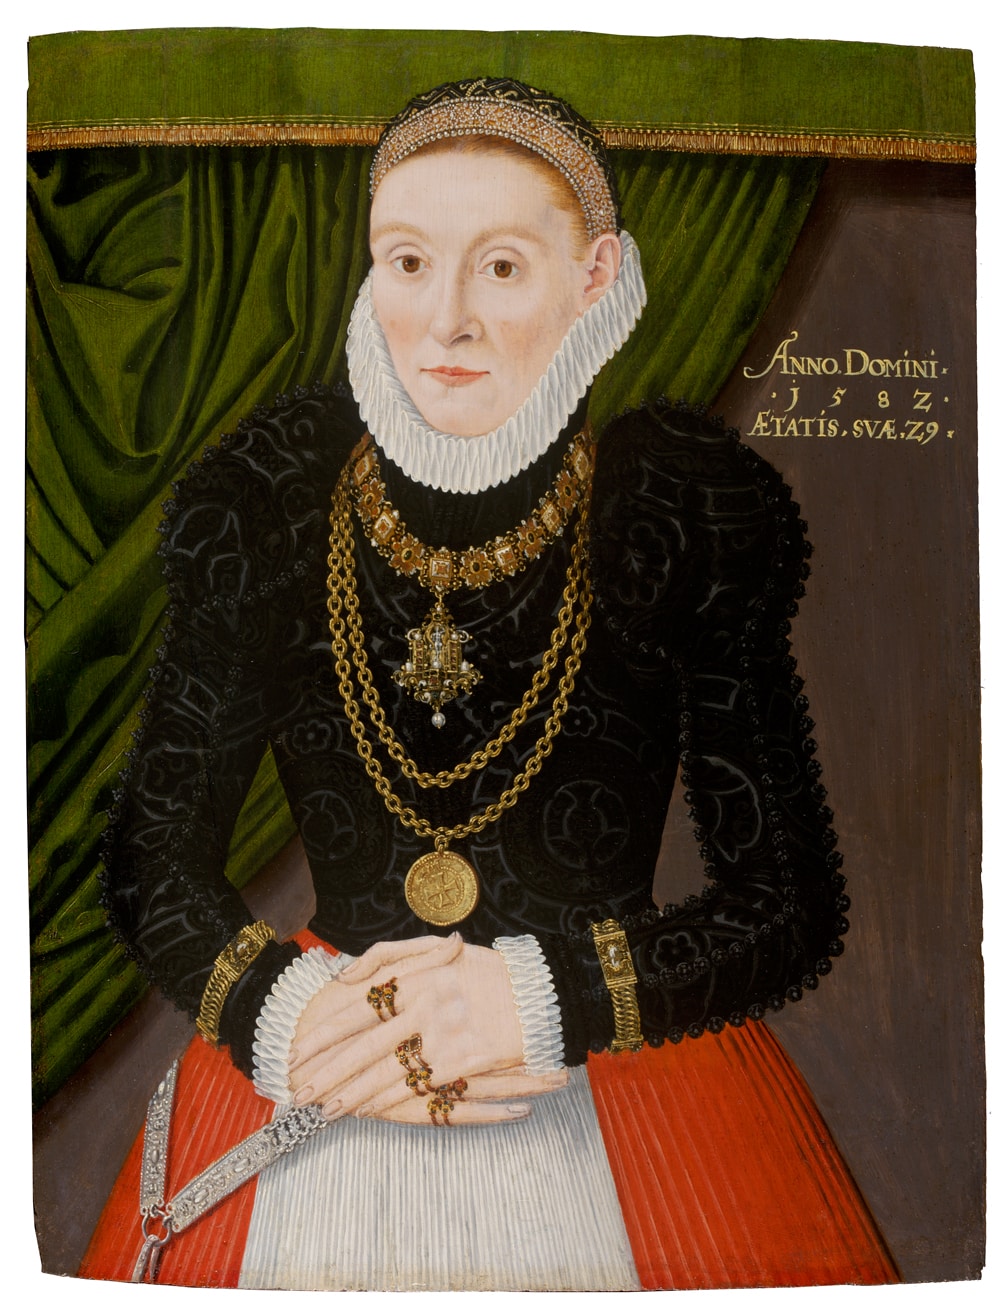 Portrait of a Lady Depicting Jewelry and High Collar, Ear Obscuring Fashion. 1582, Germany.